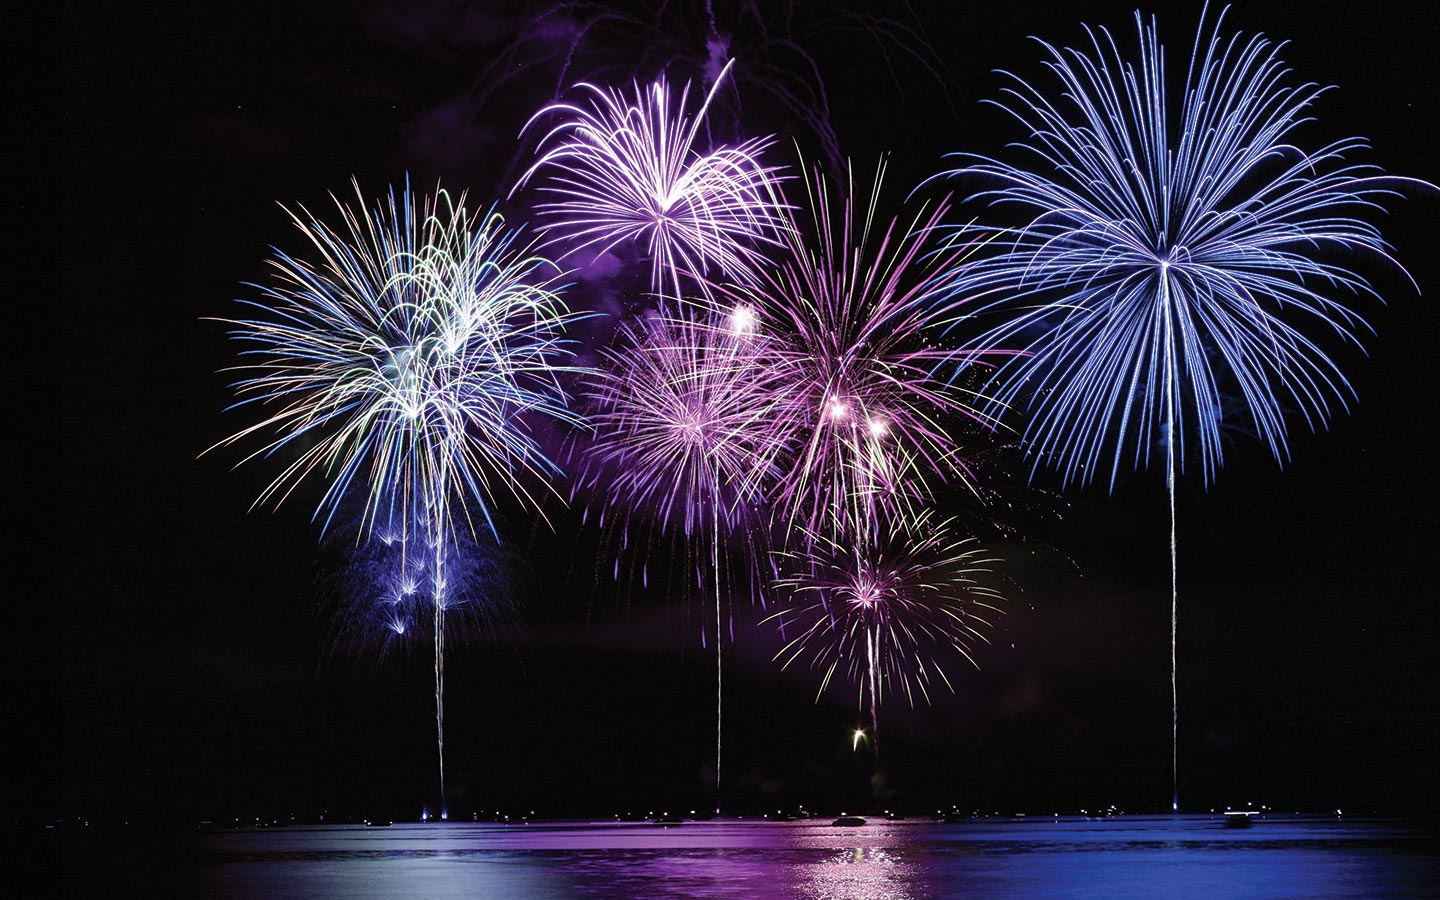 10 great places for New Year's Eve fireworks and more